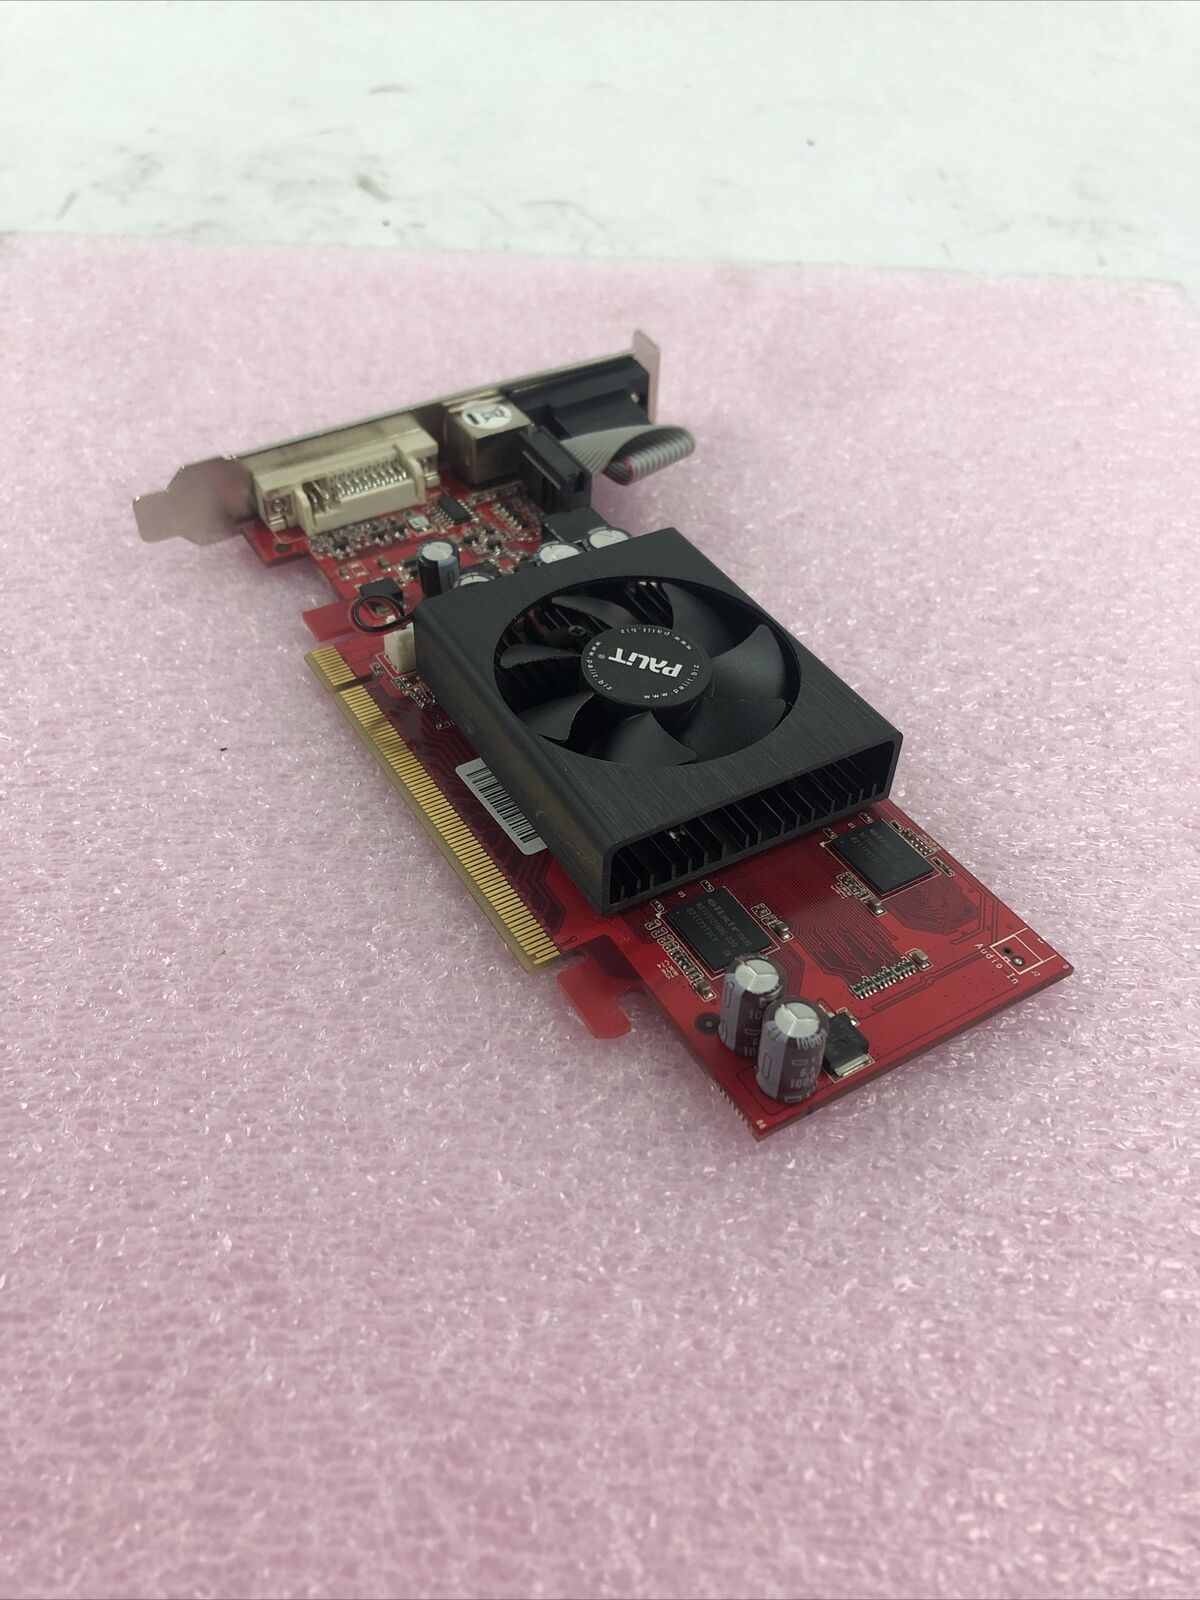 XFX Radeon 8400GS PCI-E 256MB DDR2 TV-OUT DVI Graphics Card